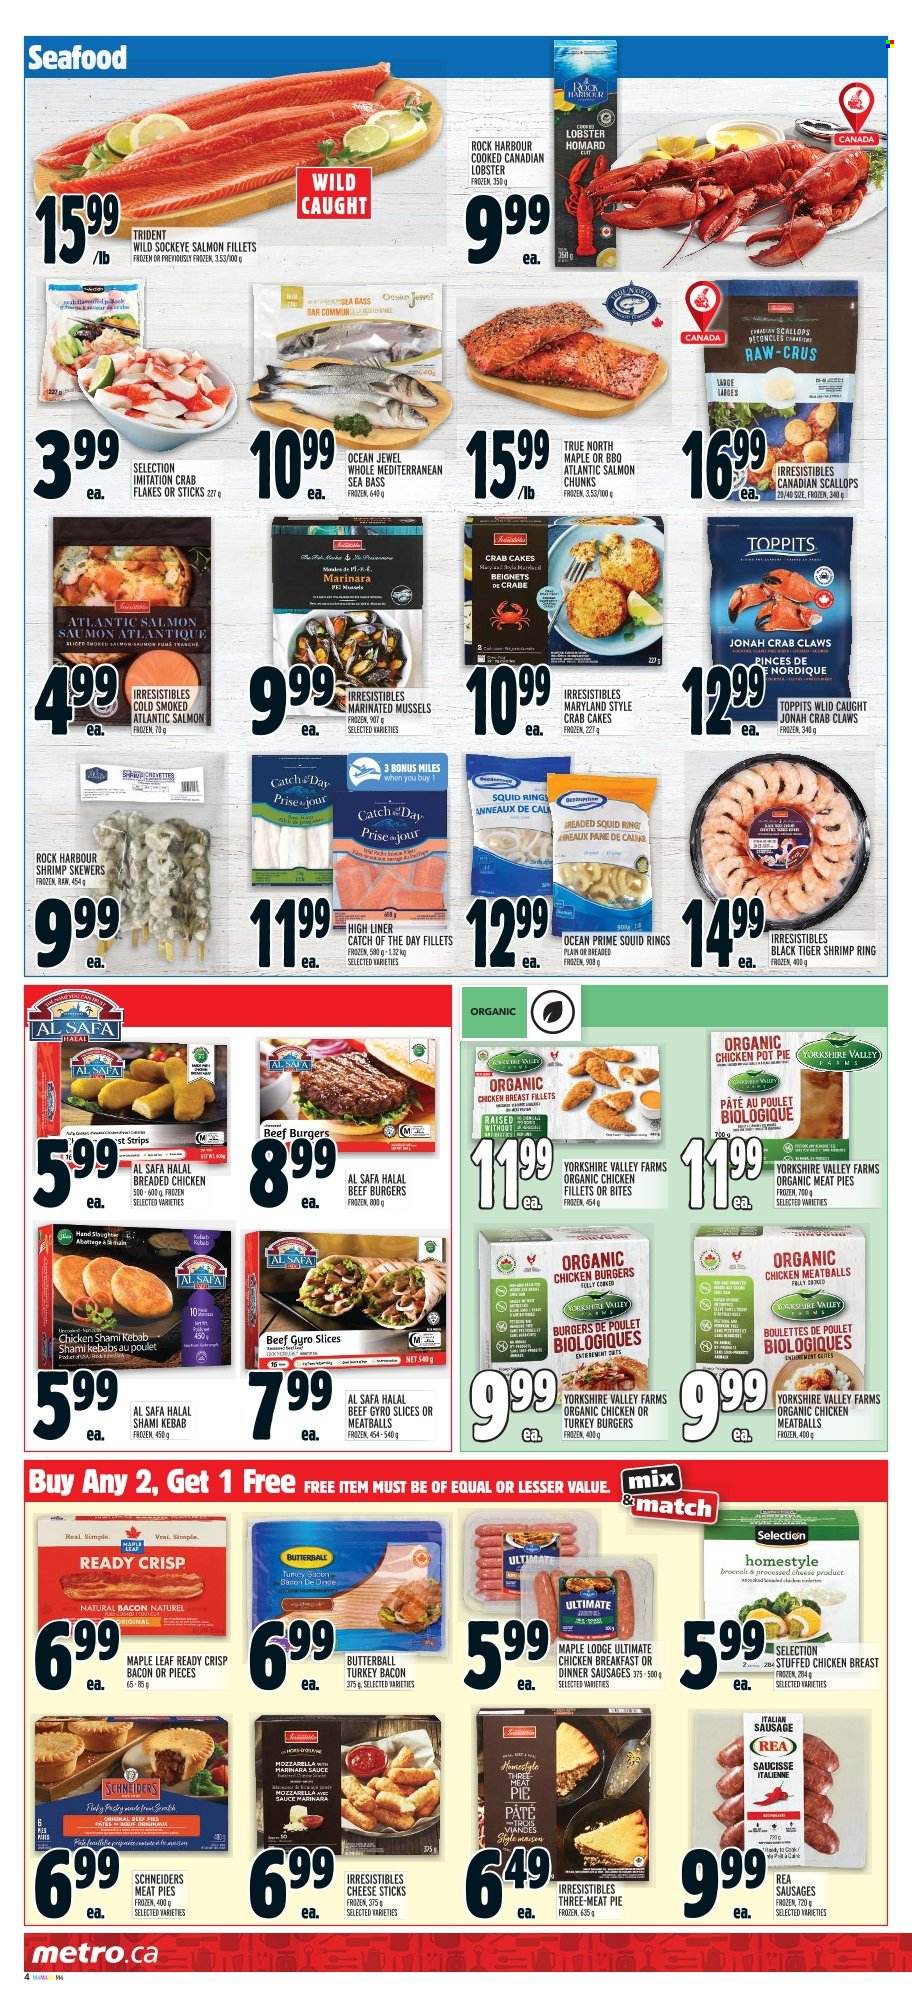 thumbnail - Metro Flyer - February 02, 2023 - February 08, 2023 - Sales products - pie, pot pie, lobster, mussels, salmon, salmon fillet, scallops, sea bass, squid, seafood, fish, shrimps, squid rings, crab cake, meatballs, hamburger, sauce, fried chicken, beef burger, stuffed chicken, bacon, Butterball, turkey bacon, sausage, cheese, strips, cheese sticks, Trident, Cerés, chicken, turkey burger, pot. Page 5.